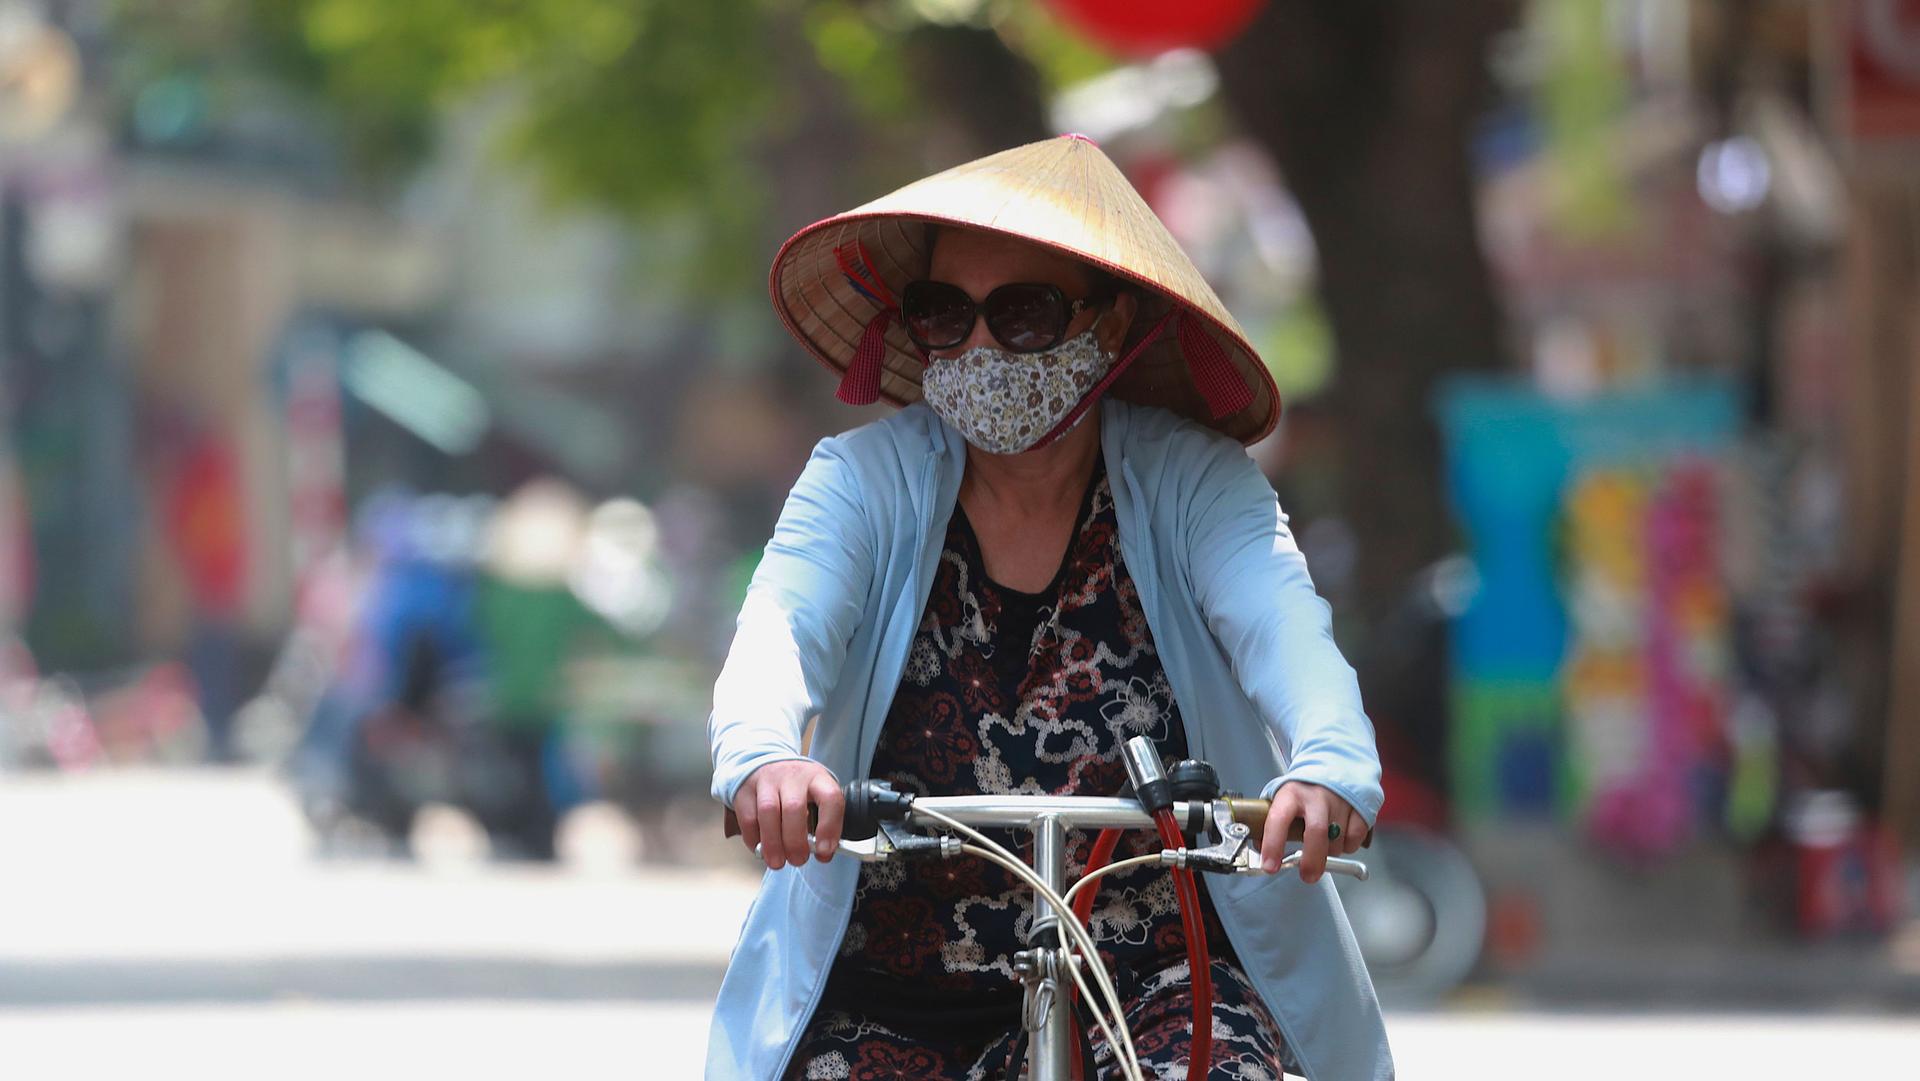 A woman is shown wearing a blue jacket, sunglasses, face mask and a straw hat while writing a bicycle.